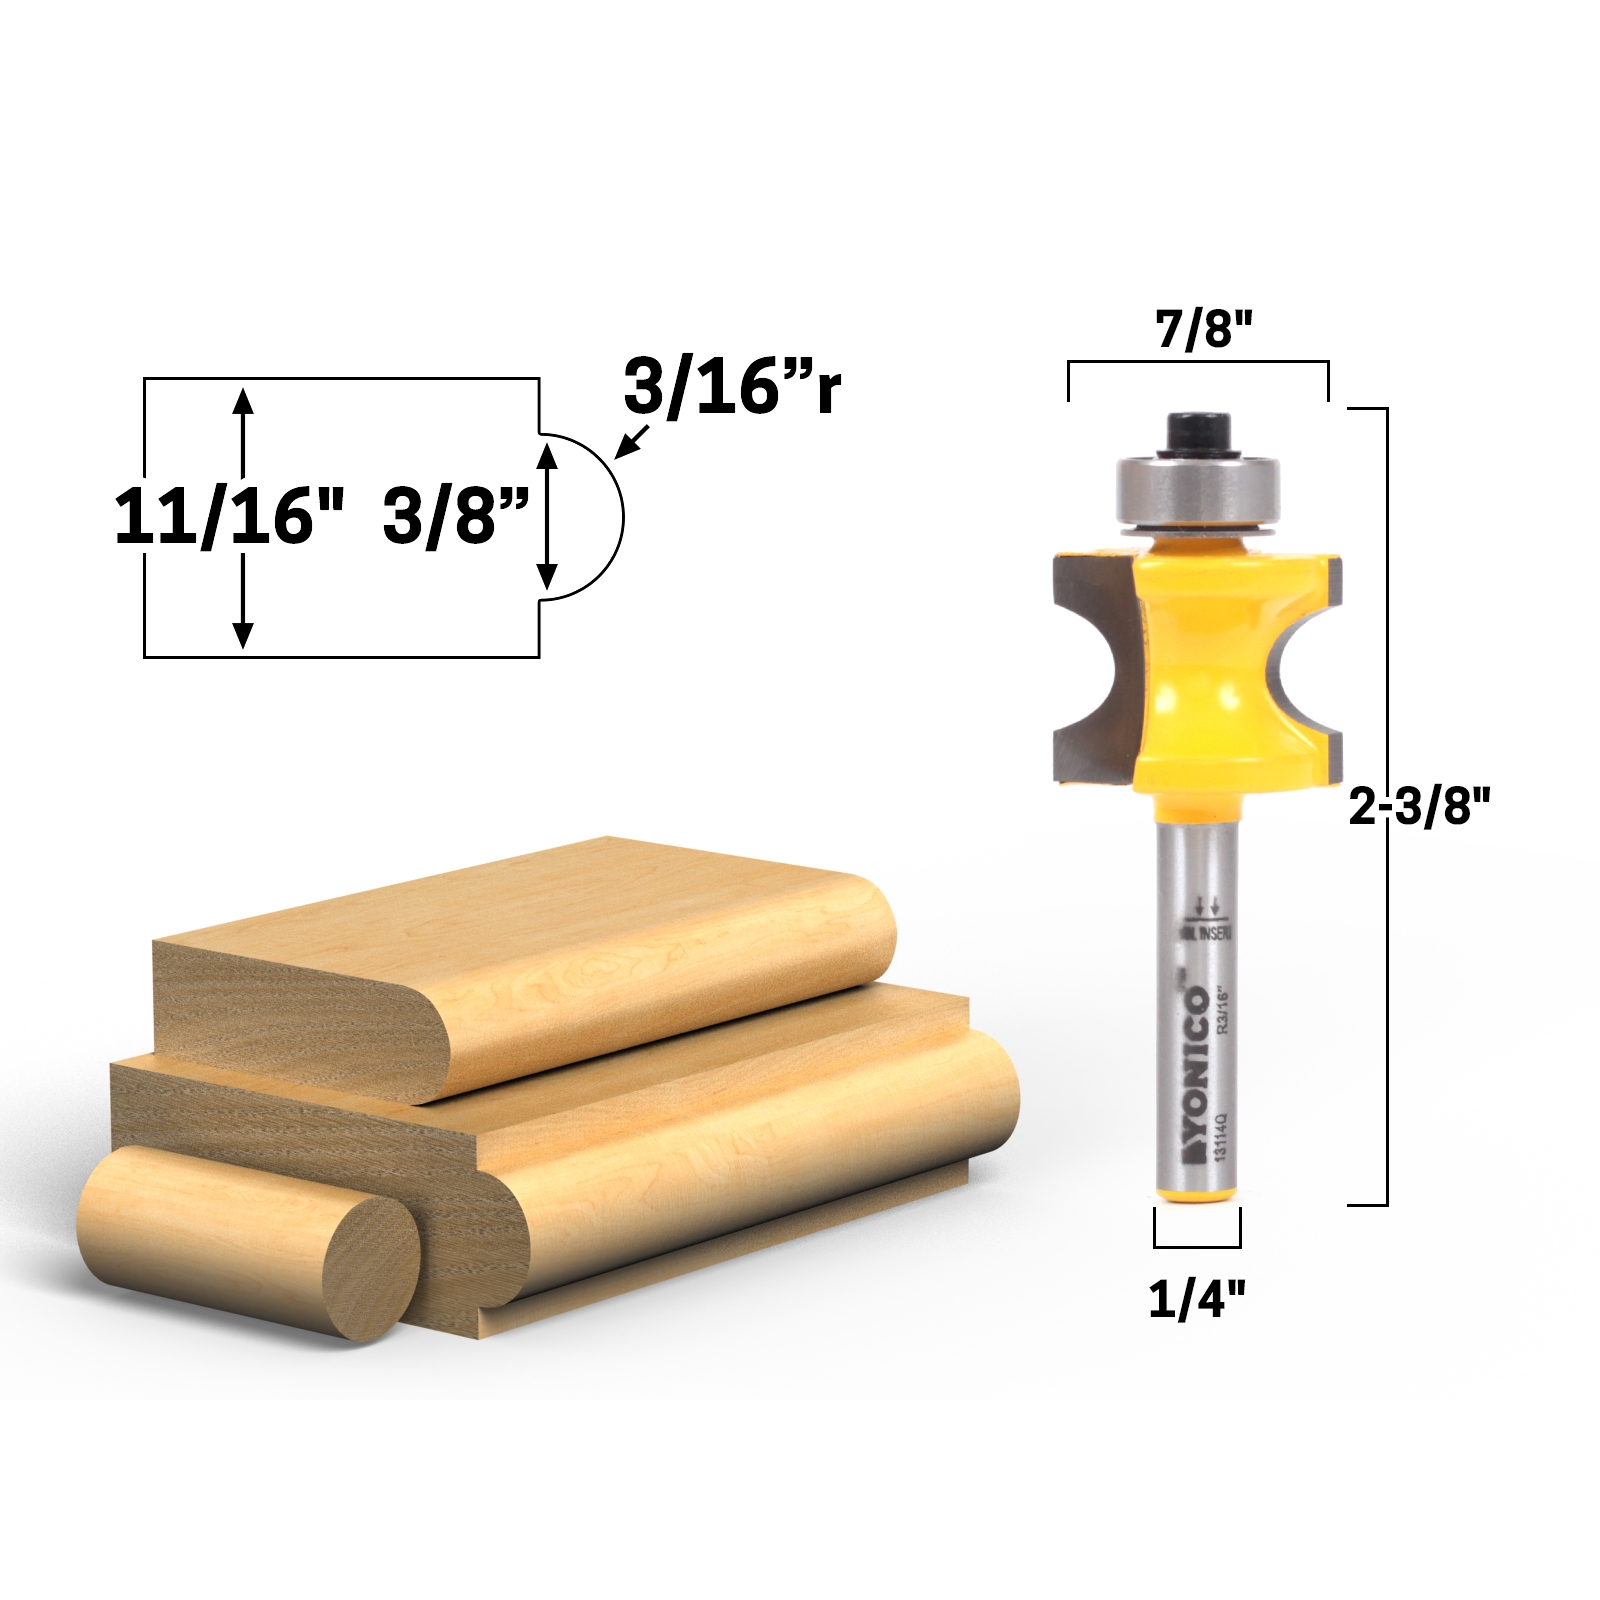 3 NEW  3/16" R Classical Ogee Edge Profile Carbide Tip Router Bit qw 